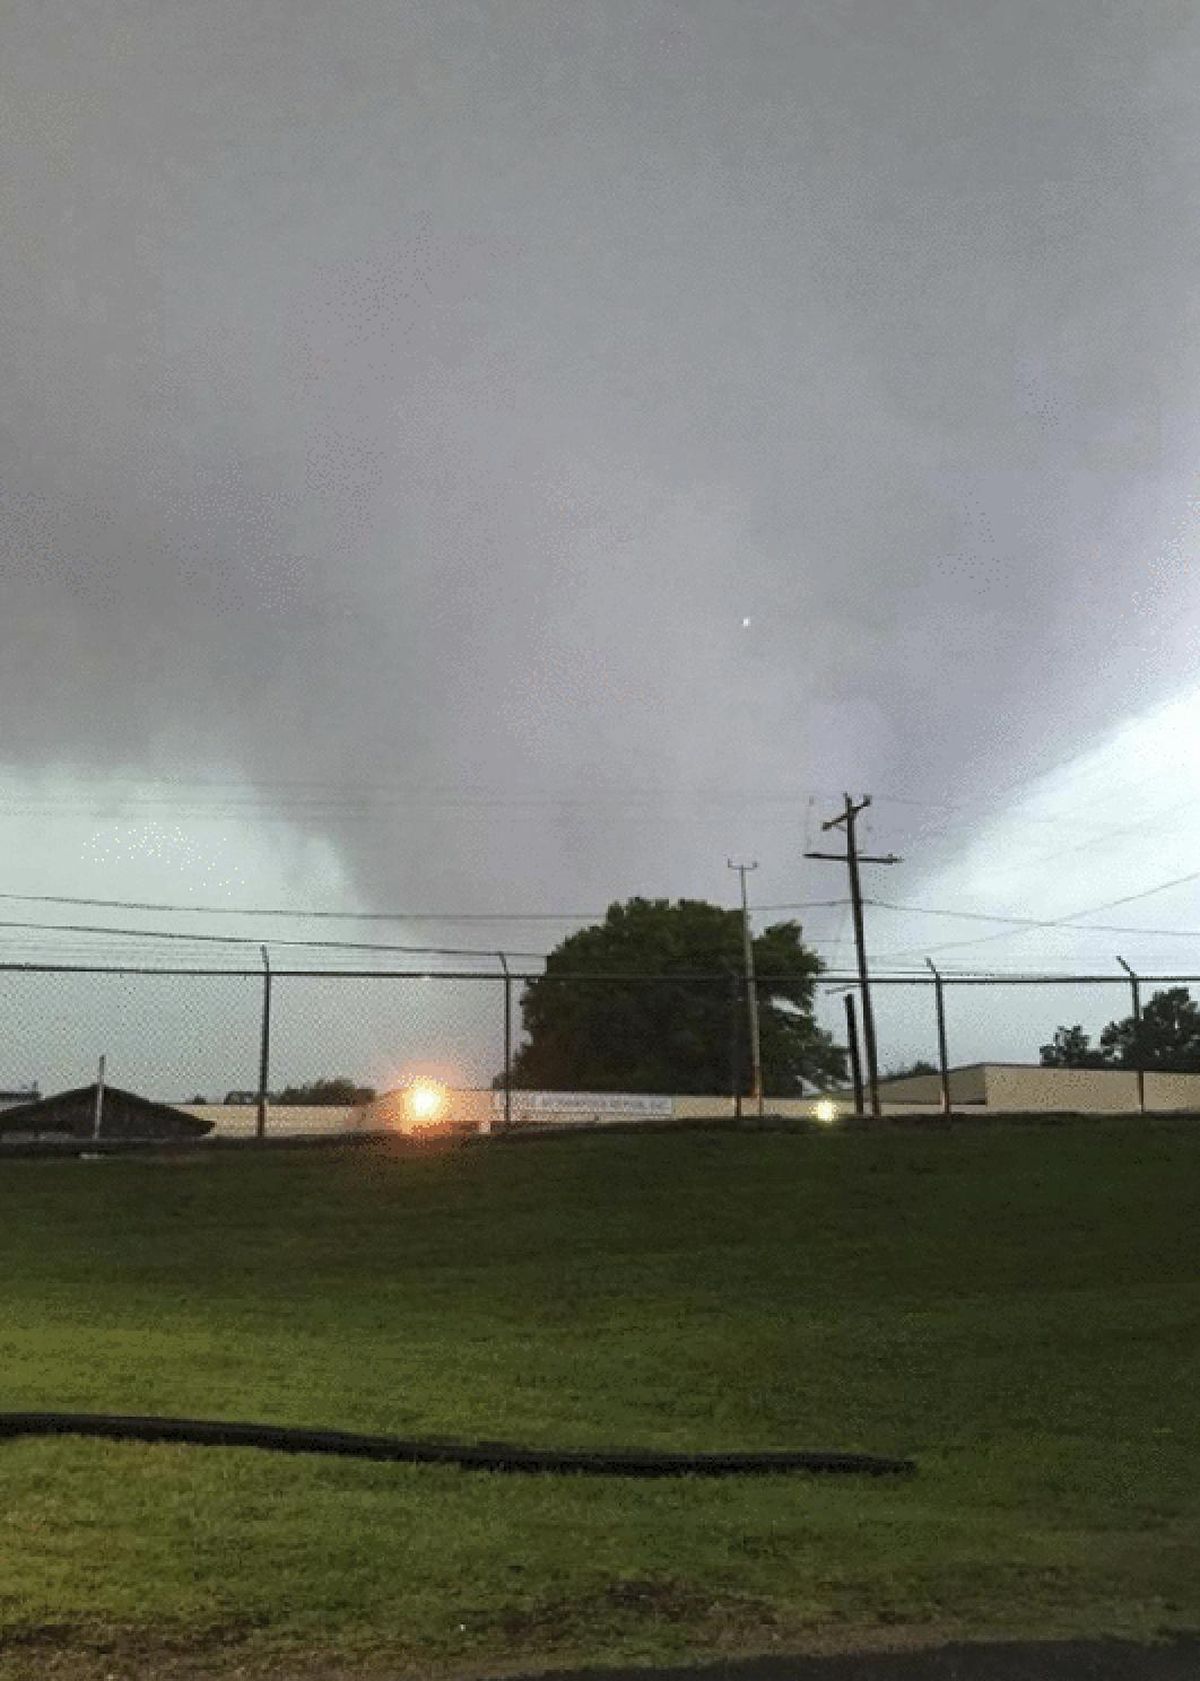 The Warren County Emergency Management Agency shows what looks like a tornado April 30, 2017, that approached Vicksburg, Miss. A new study finds that tornado activity is generally shifting eastward to areas just east of the Mississippi River that are more vulnerable such as Mississippi, Arkansas and Tennessee. And it